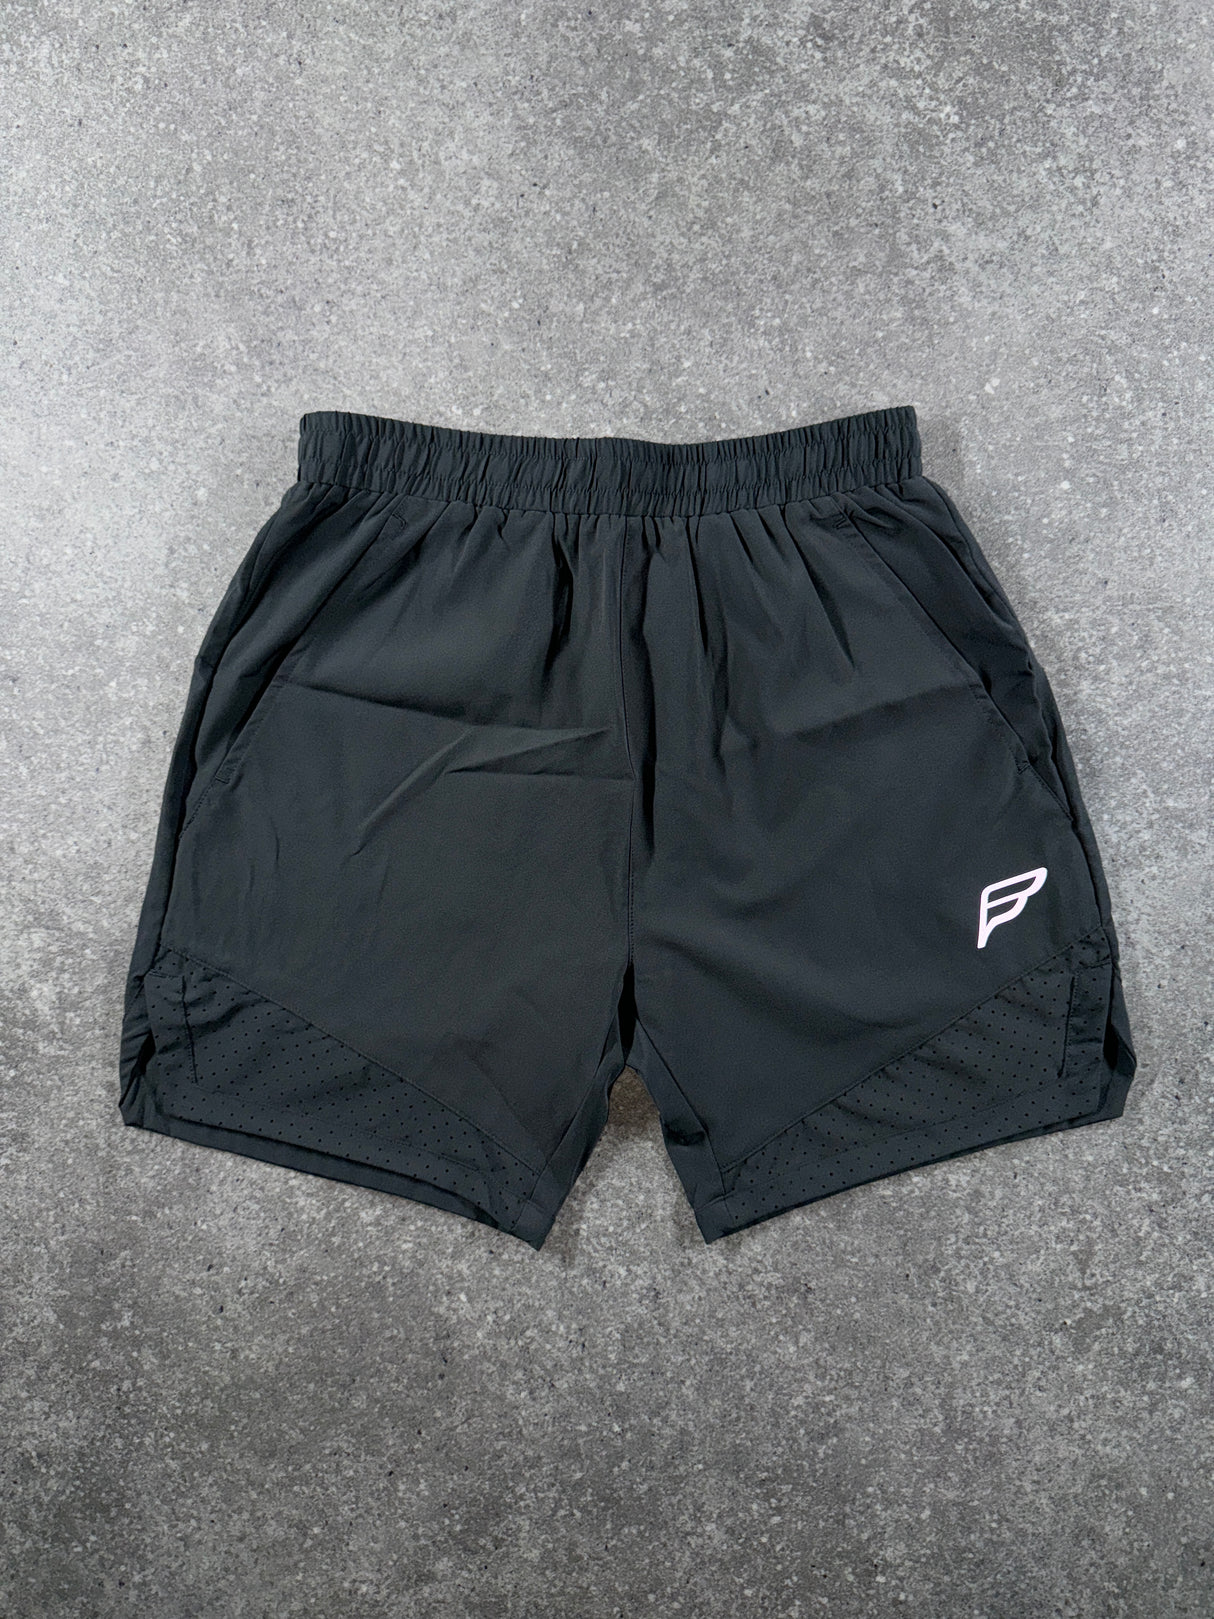 Frequency - 5" Strive Shorts - Grey